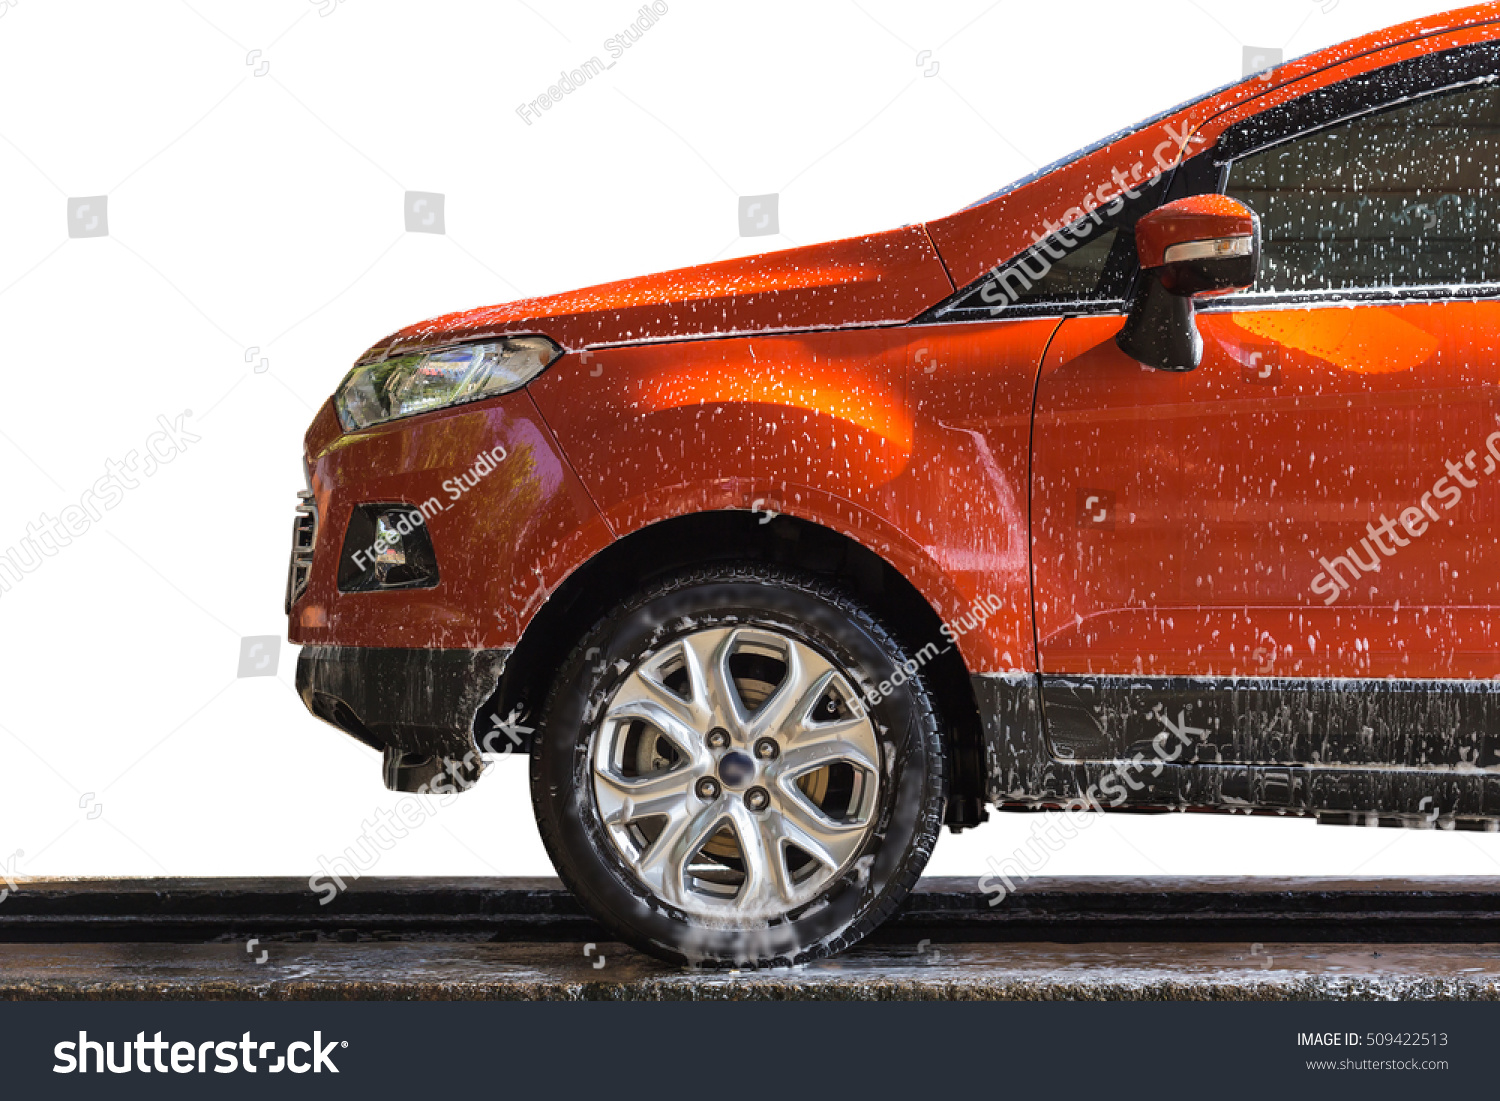 Orange car with white soap on the body in car care shop. Isolated on white background #509422513